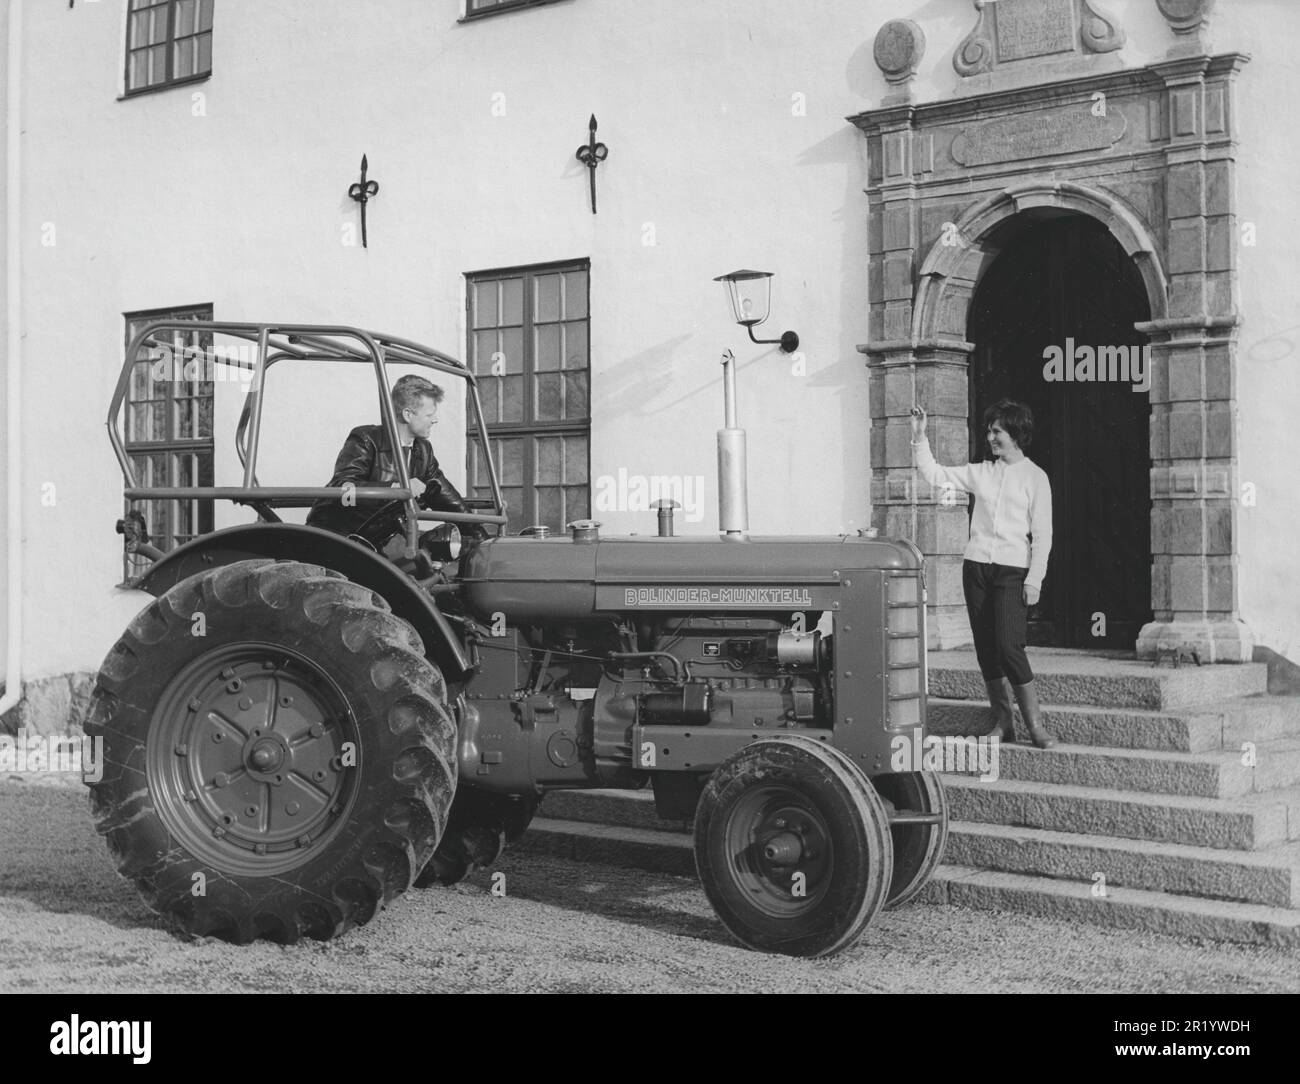 Farming in the 1950s. The new BM-Volvo tractor Bison is presented and launched as one of the world's largest wheeled tractors with a 4-cylinder diesel engine with an engine output of approx. 70 hp. The model was manufactured between the years 1959-1966. The man has driven up to the front door of a residence where a woman stands waving at him. Sweden 1959 Stock Photo